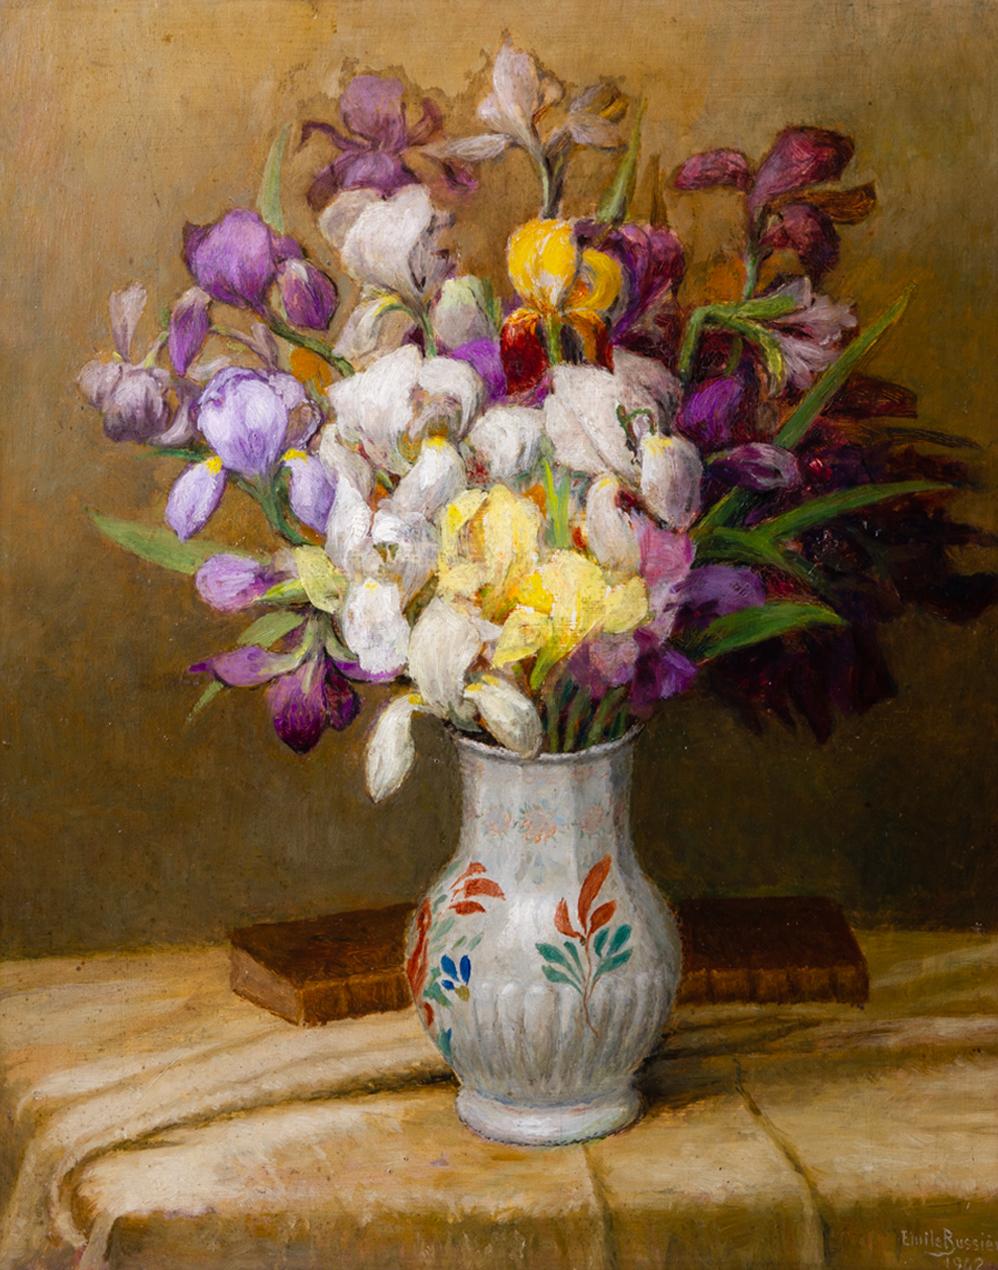 O/4898 -. Old painting dated 1942 and signed by Emile Bussière : a beautiful bouquet of irises in a vase - elegant and delicate - in its original frame.  If You want, You can use the elegant large frame for a mirror, leaving the picture free.
I